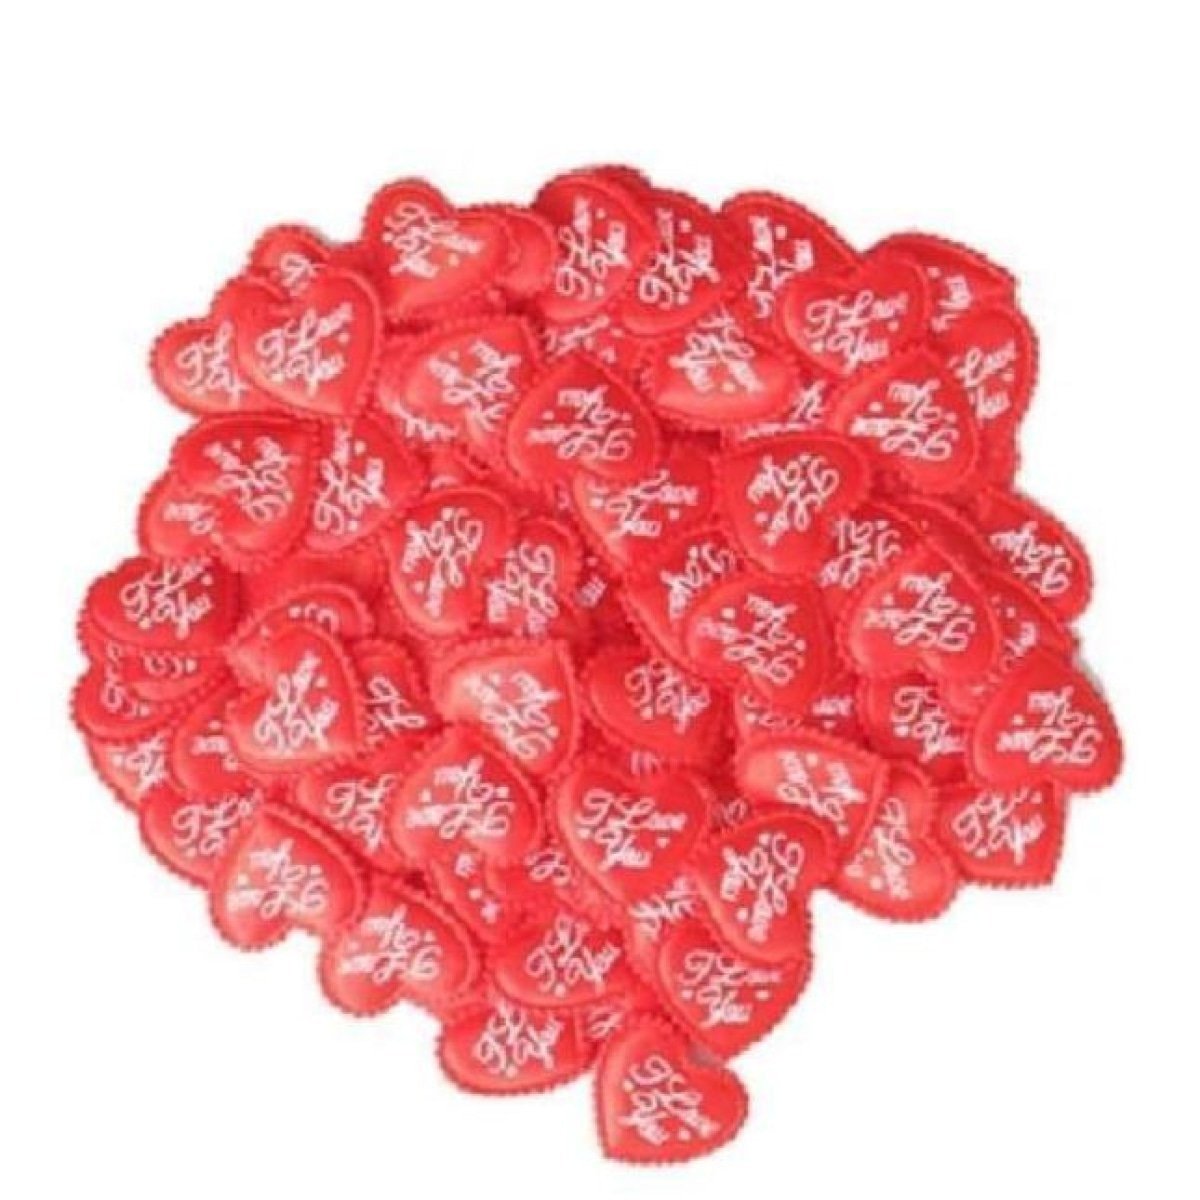 100pcs RED Fabric Hearts 3.6x3.2cm Love you Wedding Confetti Table Decorations - Asia Sell